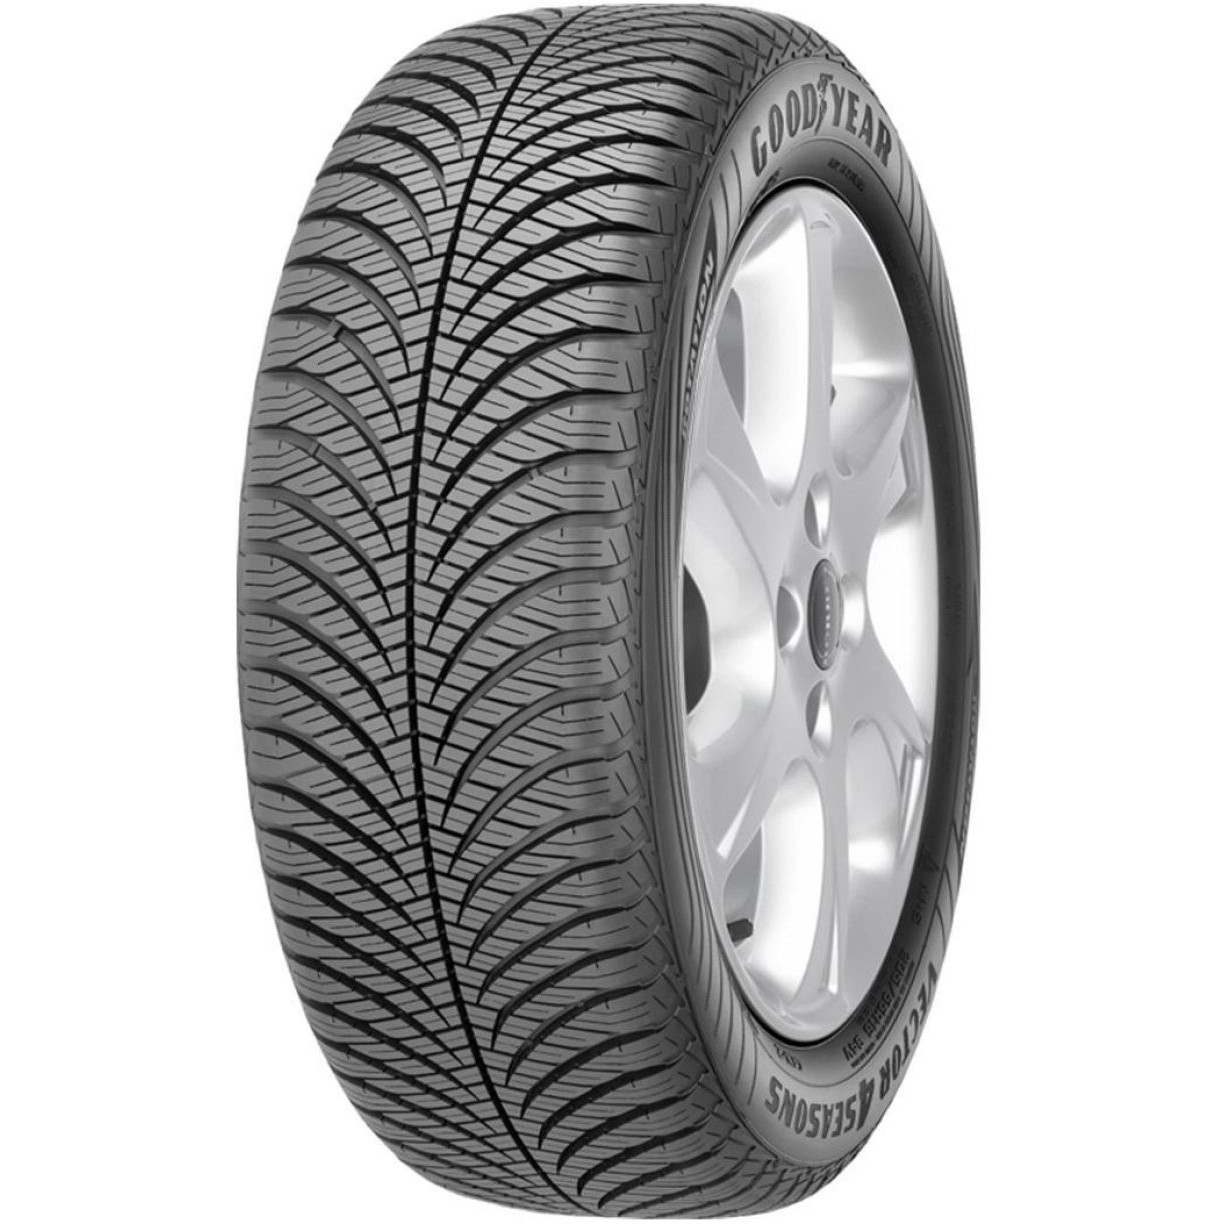 Goodyear Vector Reviews Tire - and Tests 4Seasons